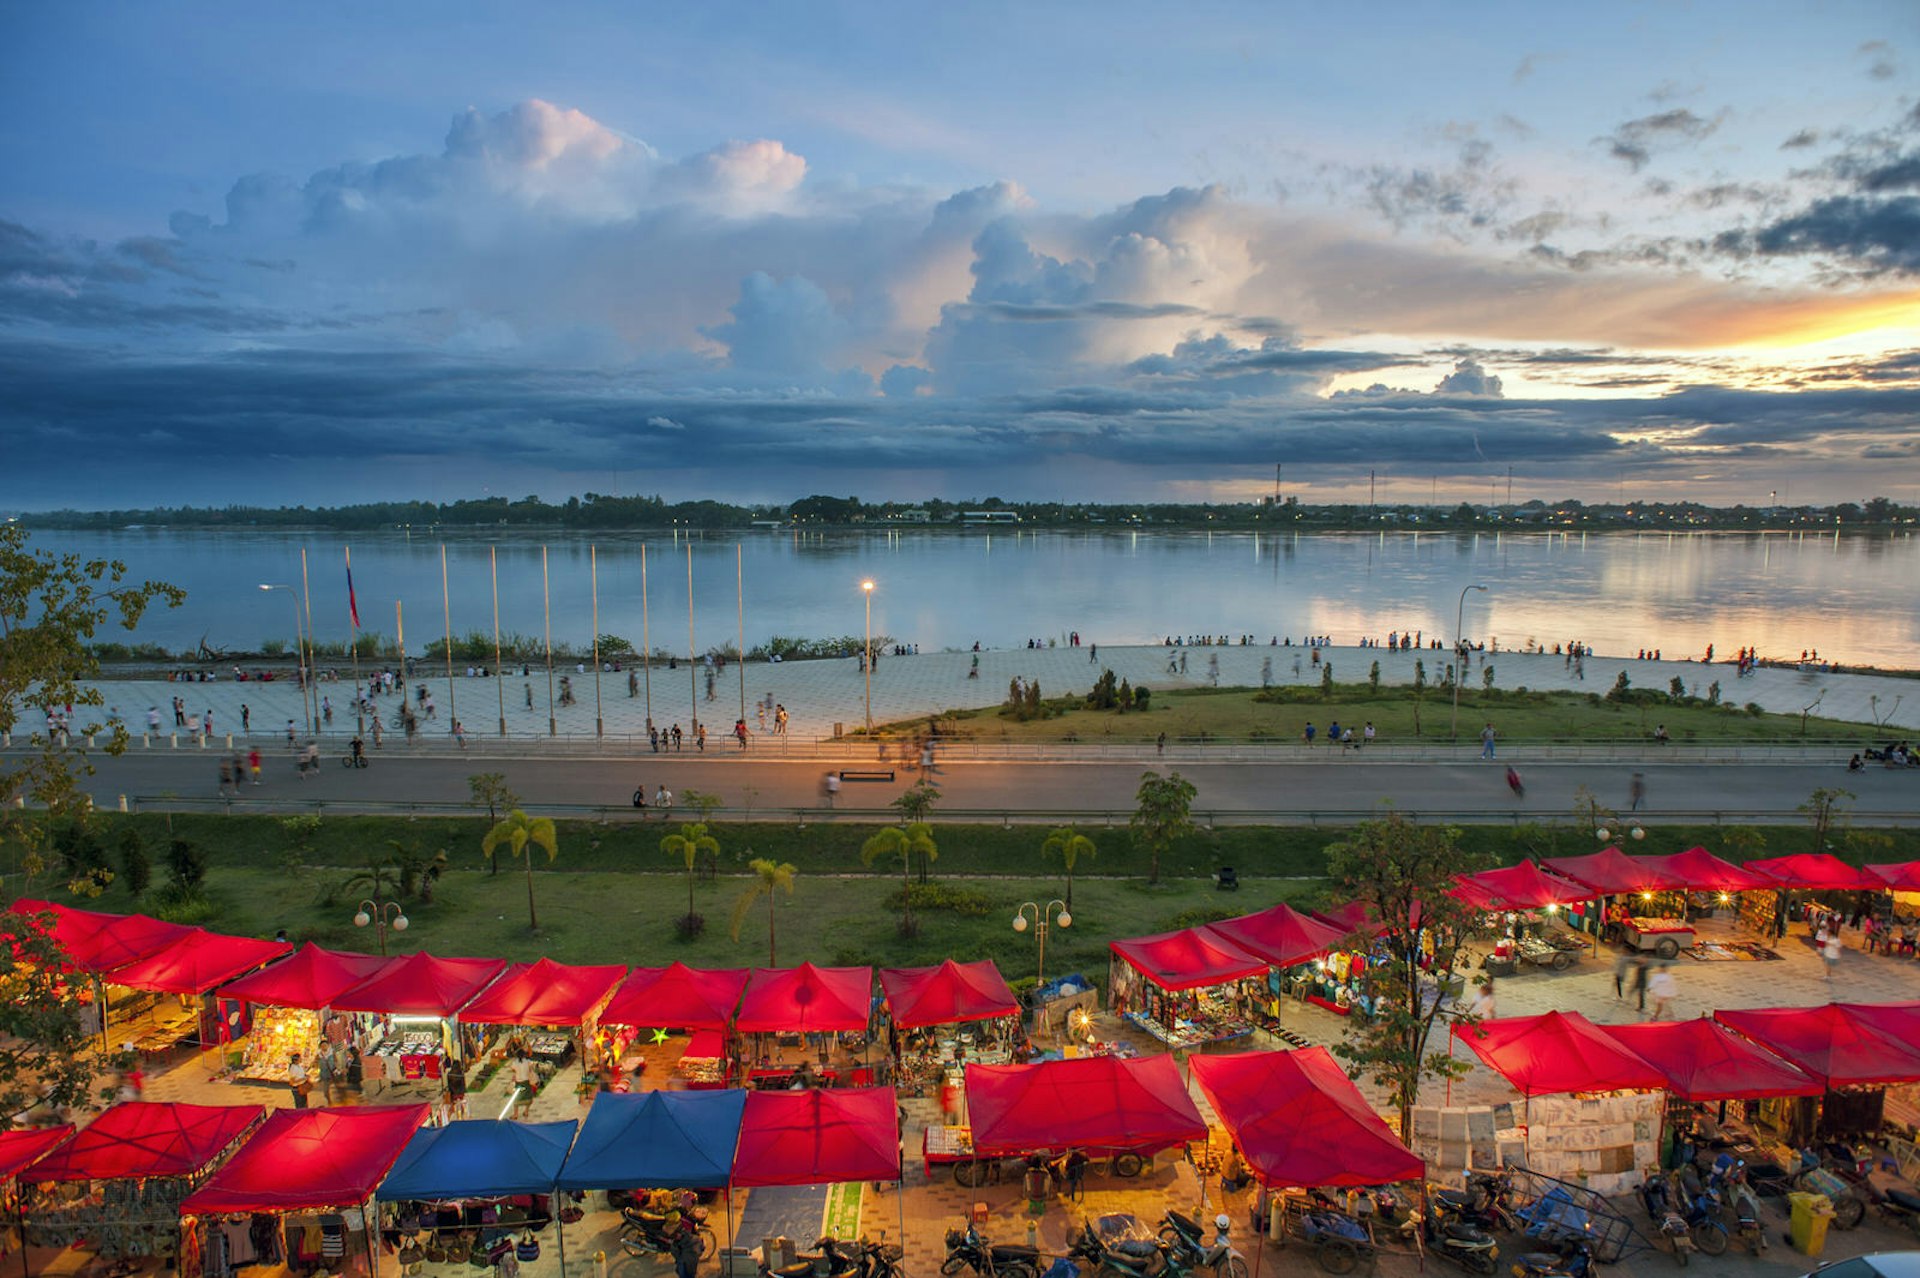 Evening falls on the Mekong River in Vientiane